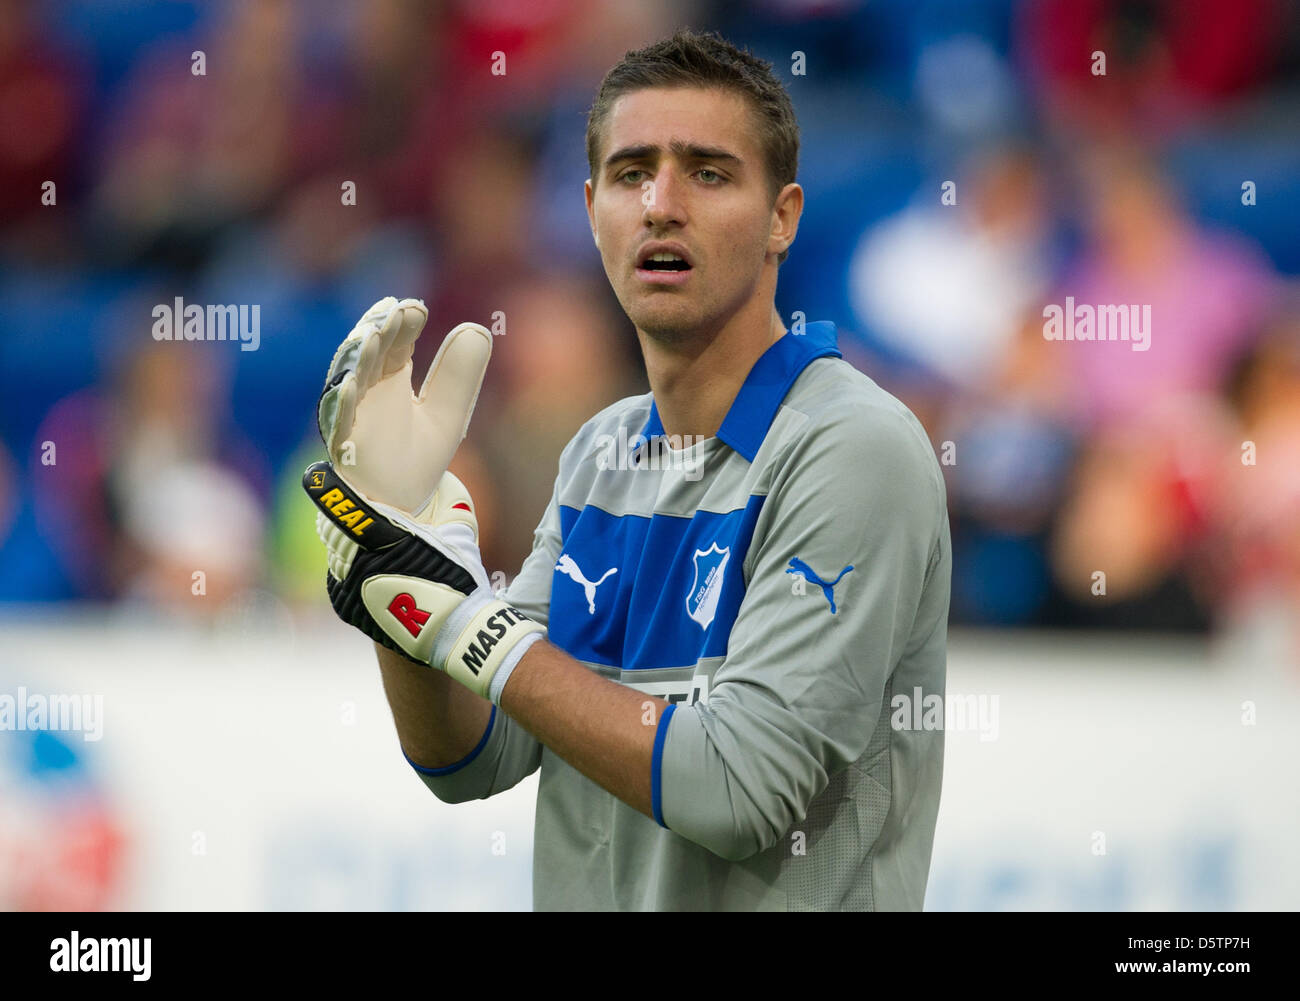 Hoffenheim's goalkeeper Koen Casteels gestures during the German Bundesliga soccer match B1899 Hoffenheim vs Hanover 96 at Rhein-Neckar-Arena in Sinsheim, Germany, 23 September 2012. Photo: UWE ANSPACH  (ATTENTION: EMBARGO CONDITIONS! The DFL permits the further  utilisation of up to 15 pictures only (no sequntial pictures or video-similar series of pictures allowed) via the intern Stock Photo